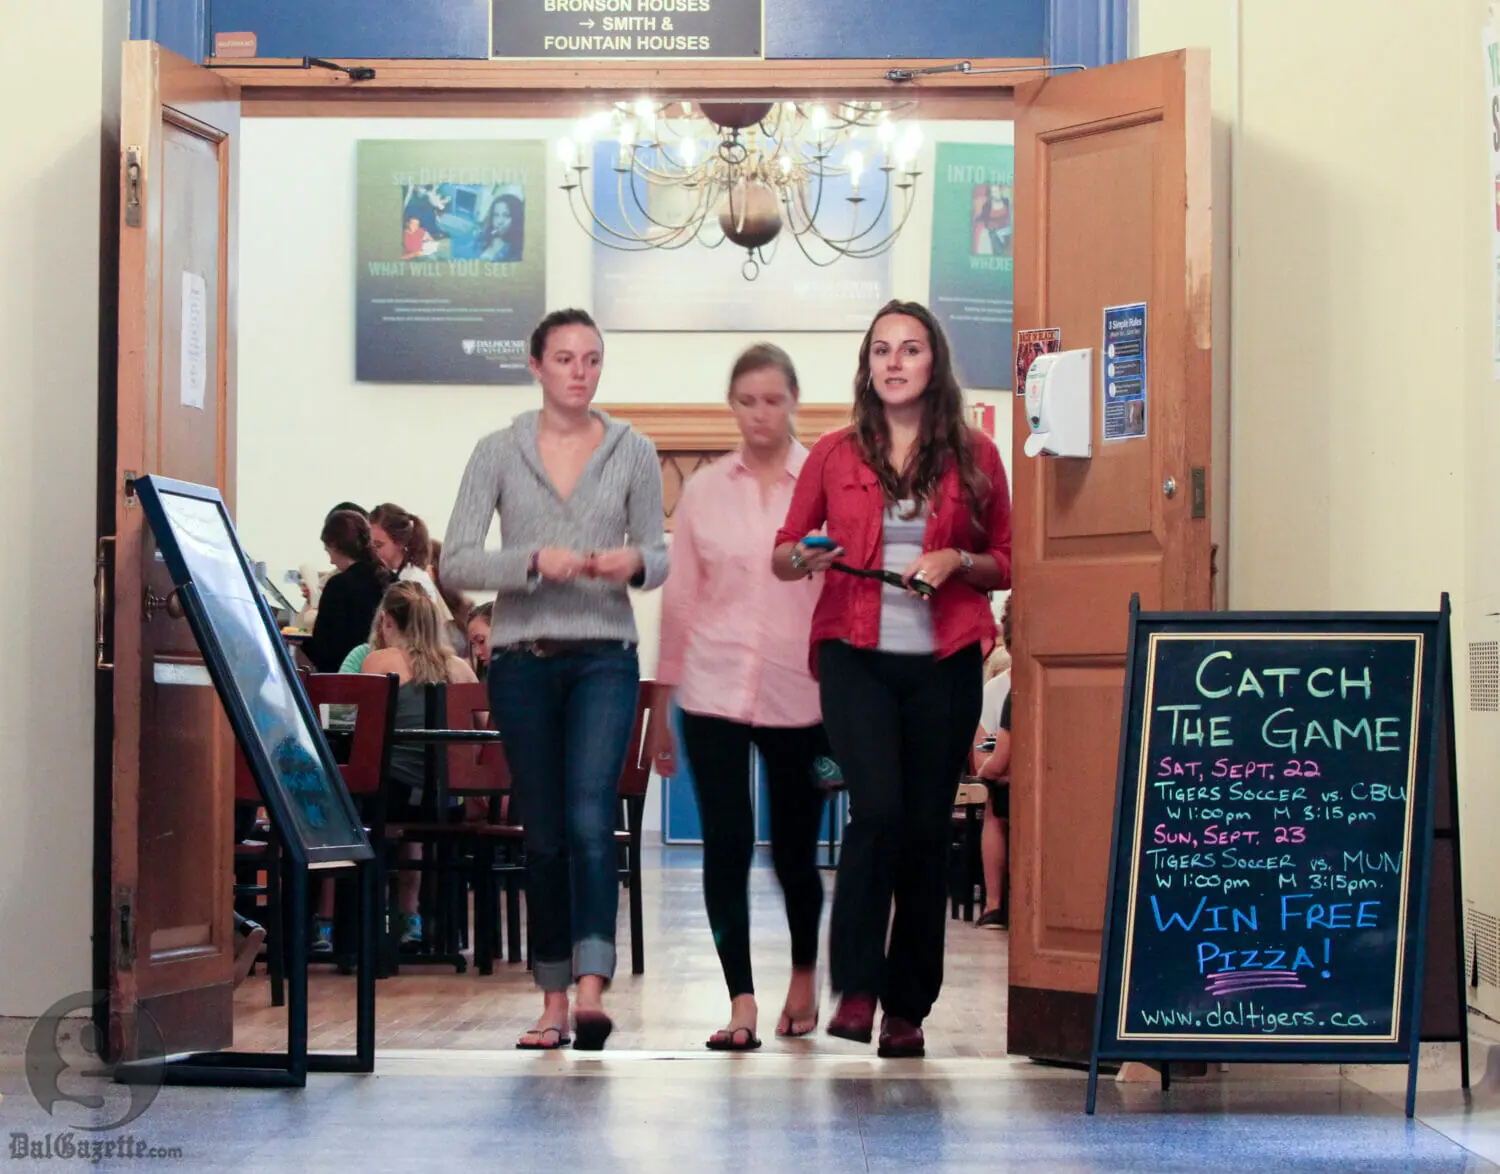 Inflexible dining hours are a setback for some student schedules. (Photo: Bryn Karcha)